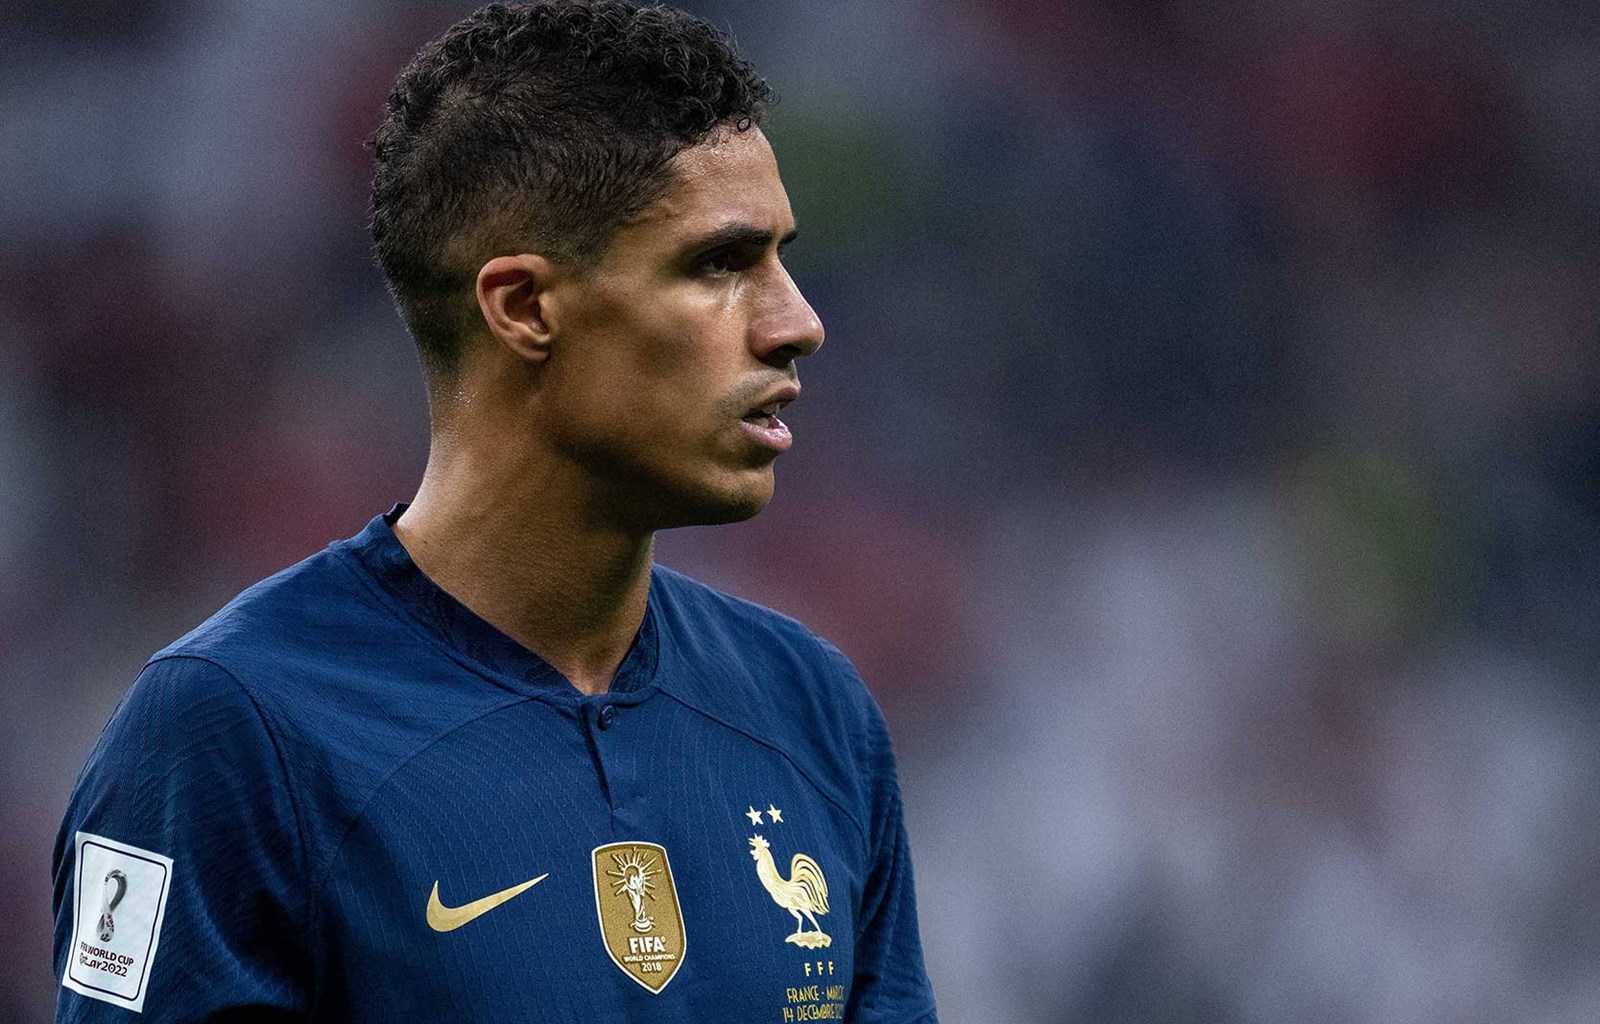 Does Raphael Varane's international retirement show players are at the limit? - FIFPRO World Players' Union